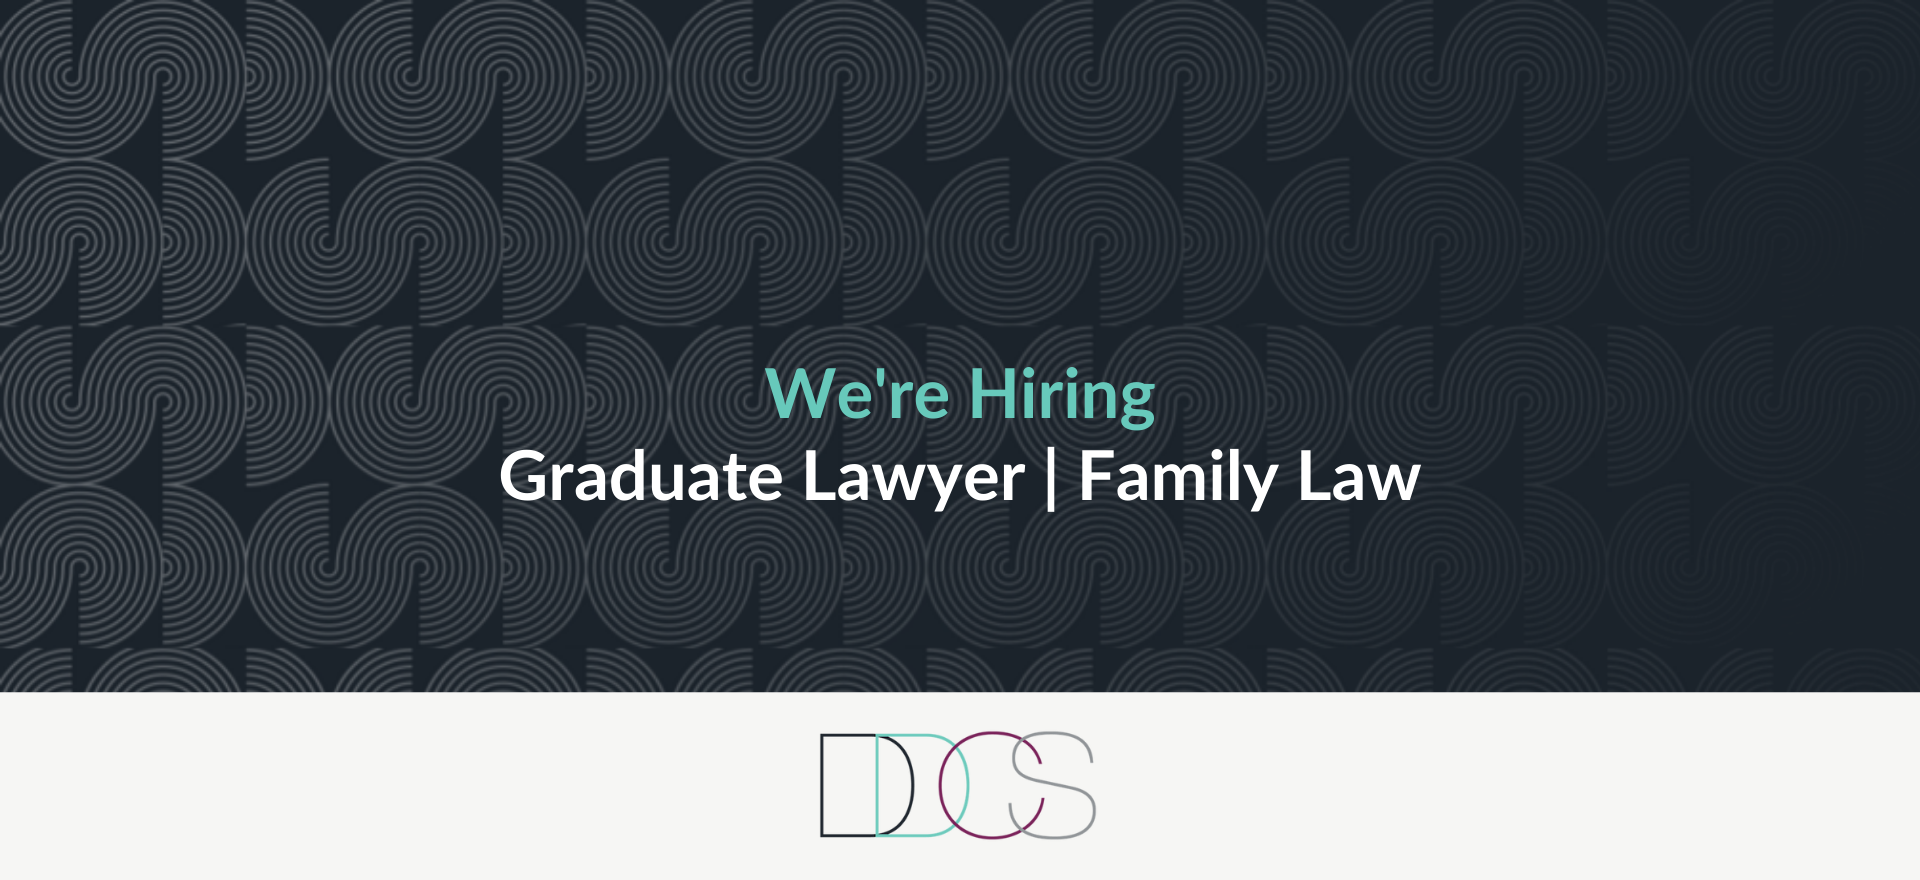 Position available for graduate lawyer interested in family law